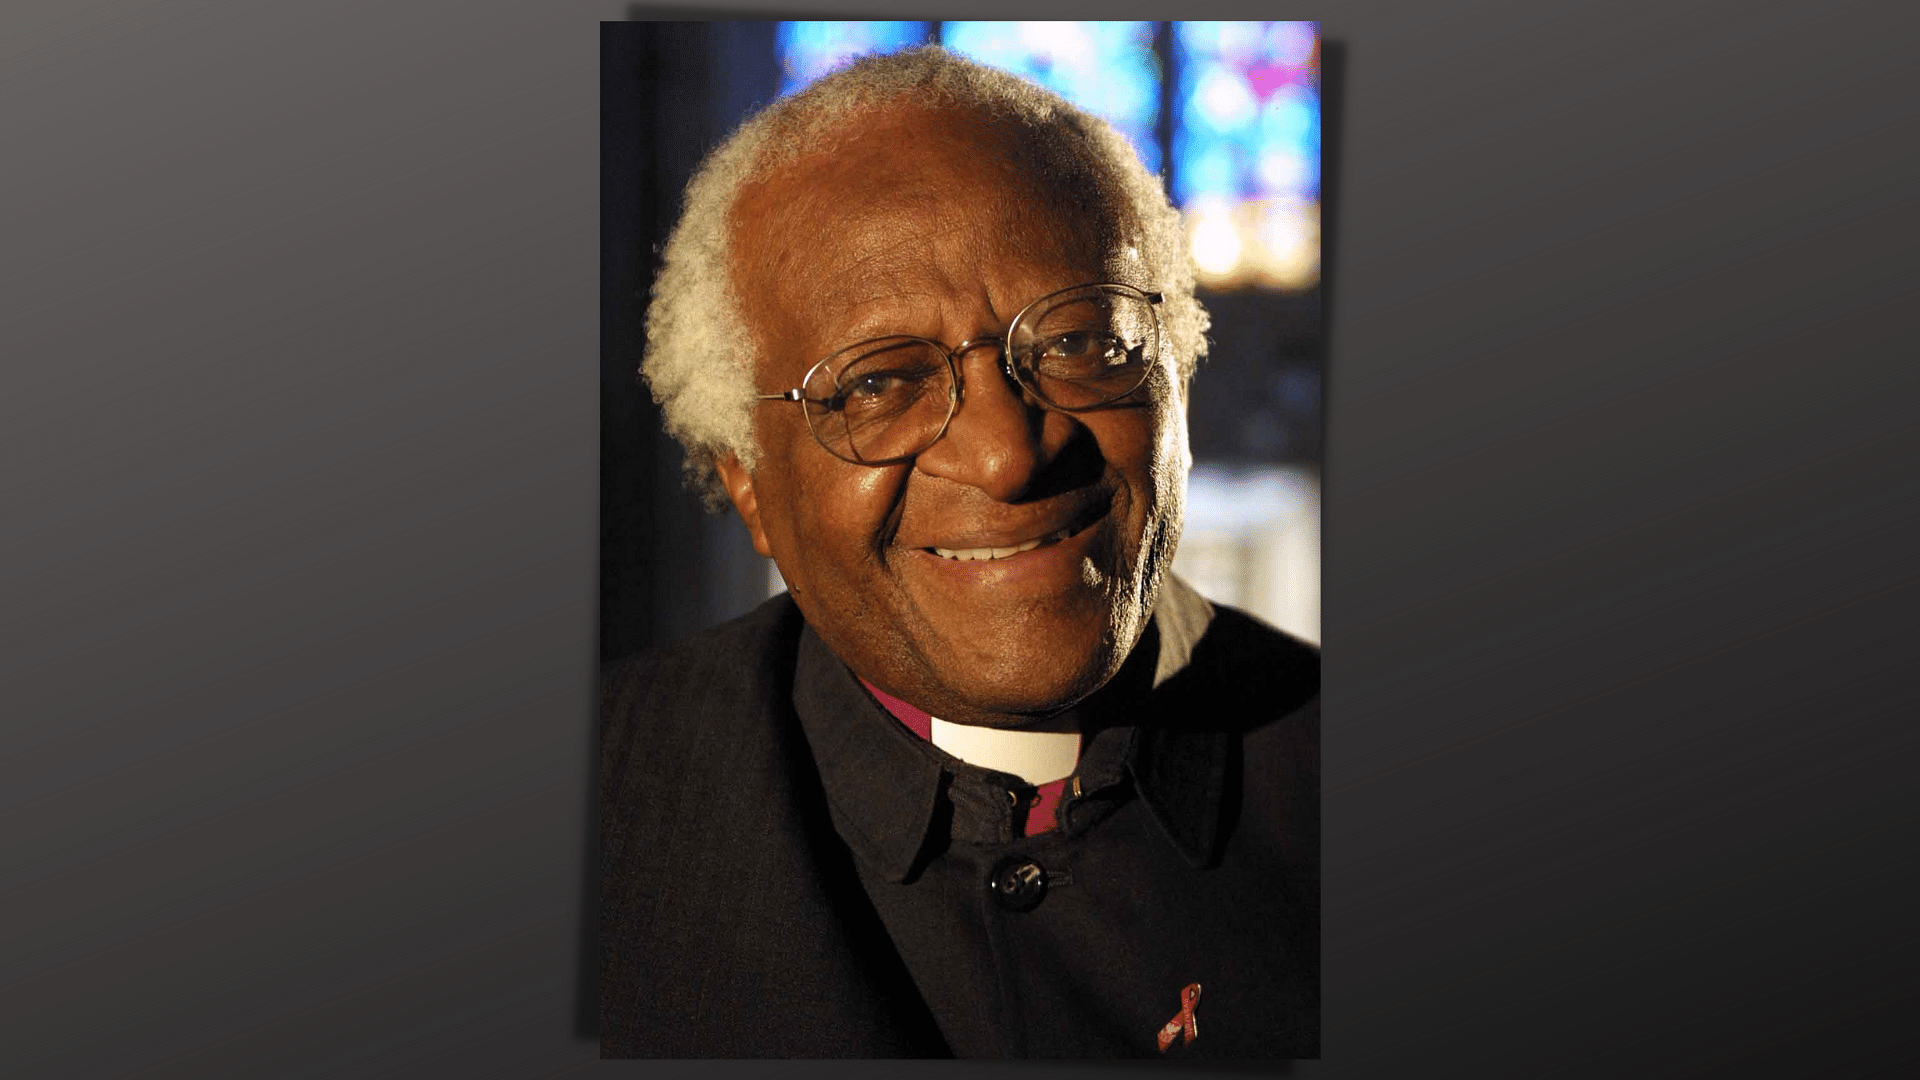 <div class="paragraphs"><p>Nobel Peace Prize laureate and one of South Africa's most prominent anti-apartheid icons Archbishop Desmond Tutu passed away on Sunday, 26 December, at the age of 90.</p></div>